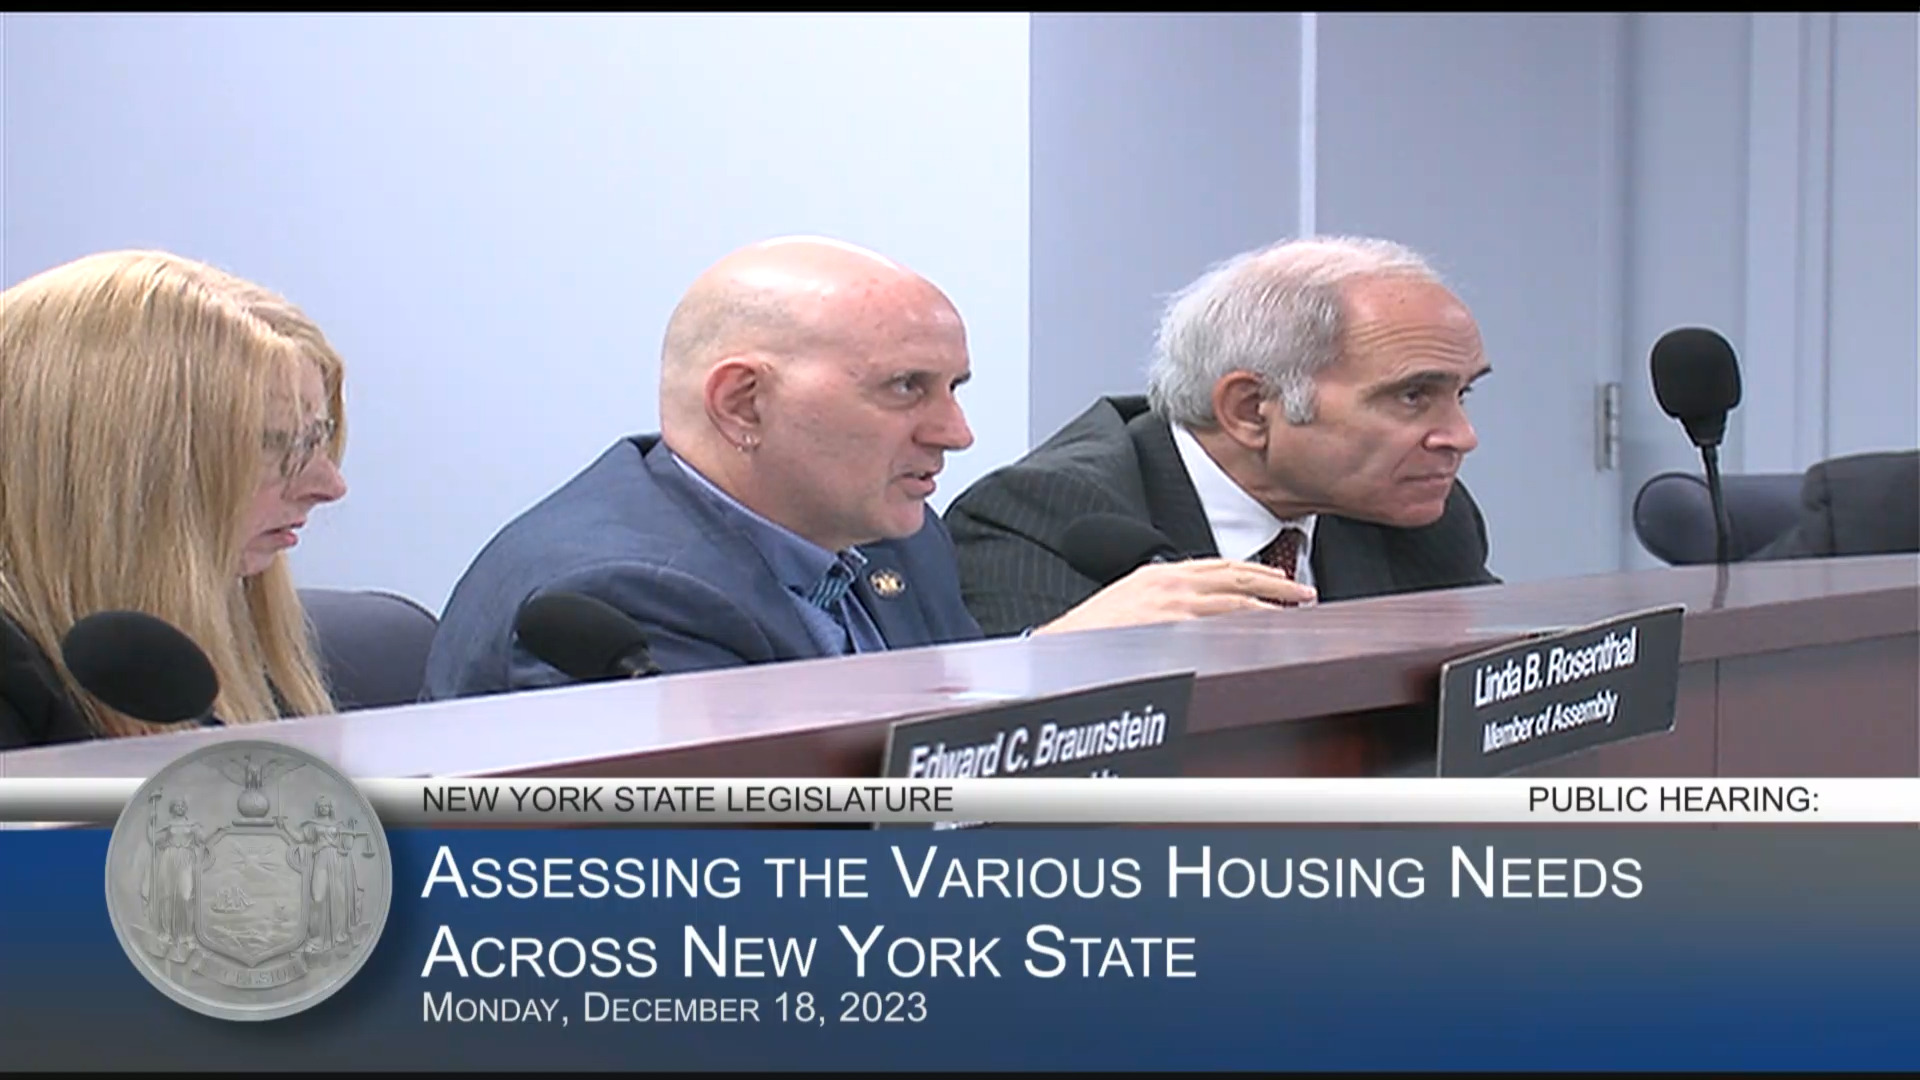 Public Hearing to Assess the Various Housing Needs Across NYS